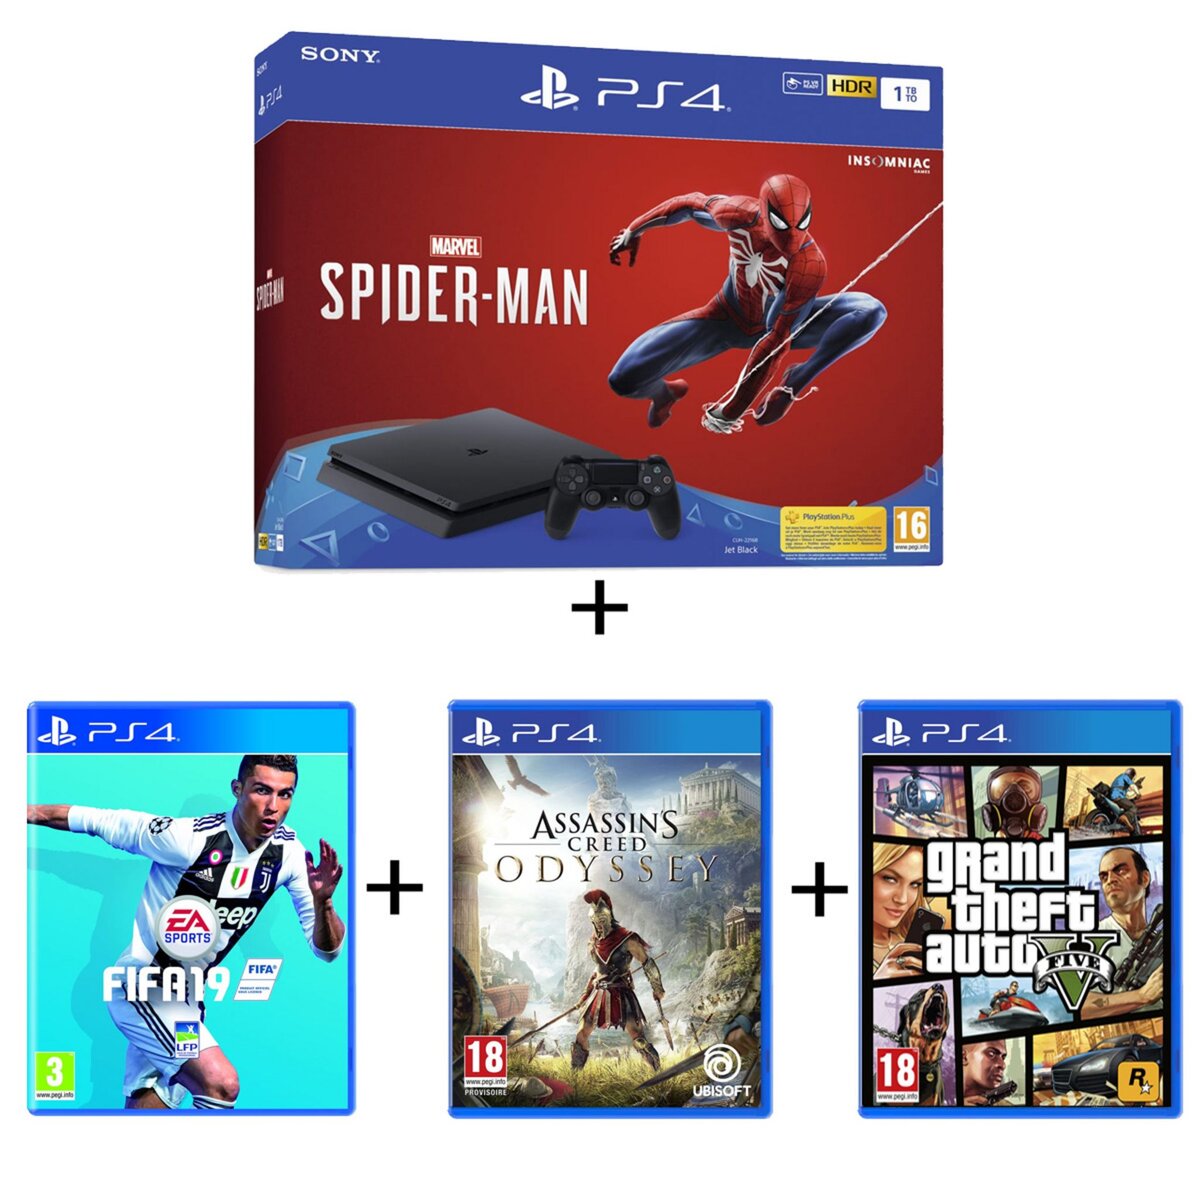 Console PS4 1To Spider-Man + FIFA 19 + Assassin's Creed Odyssey + GTA V